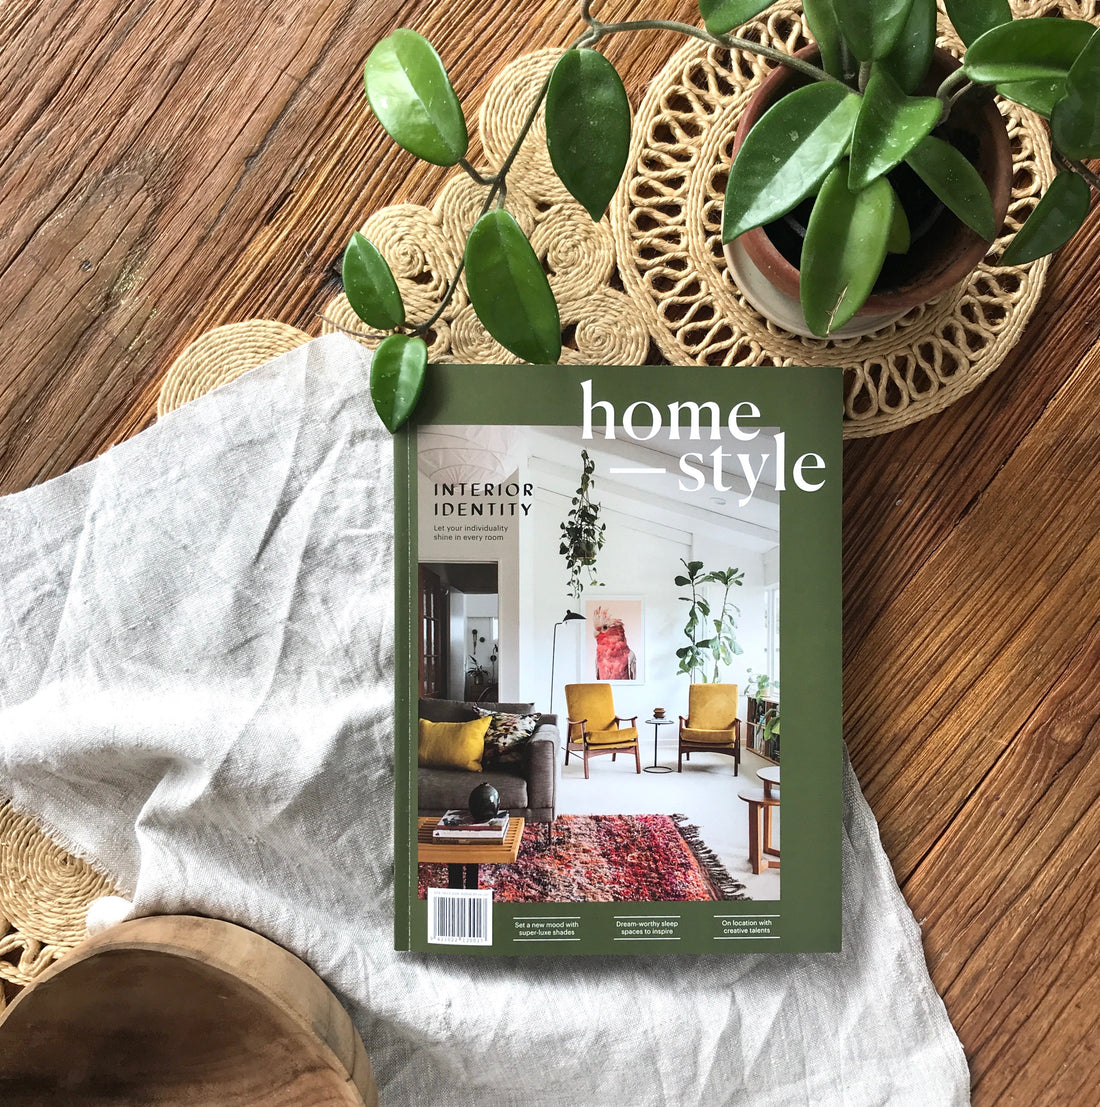 Home-Style Magazine Feature + New Art Prints